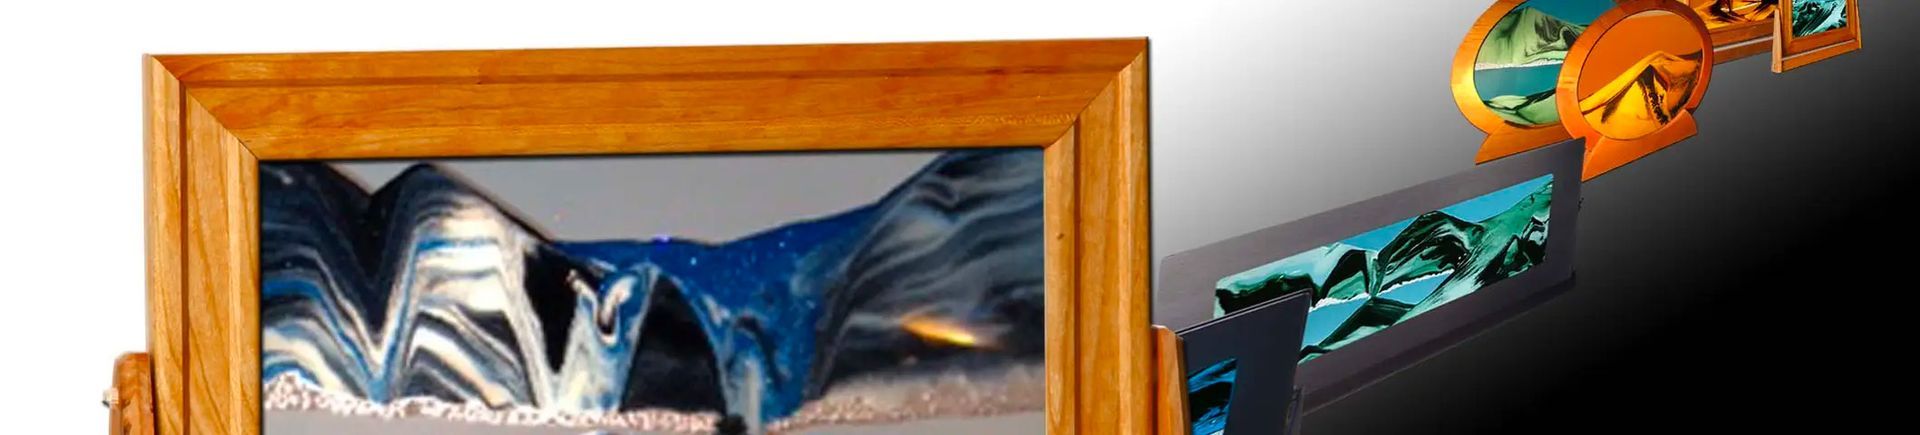 a picture of moving sand art in a wooden frame